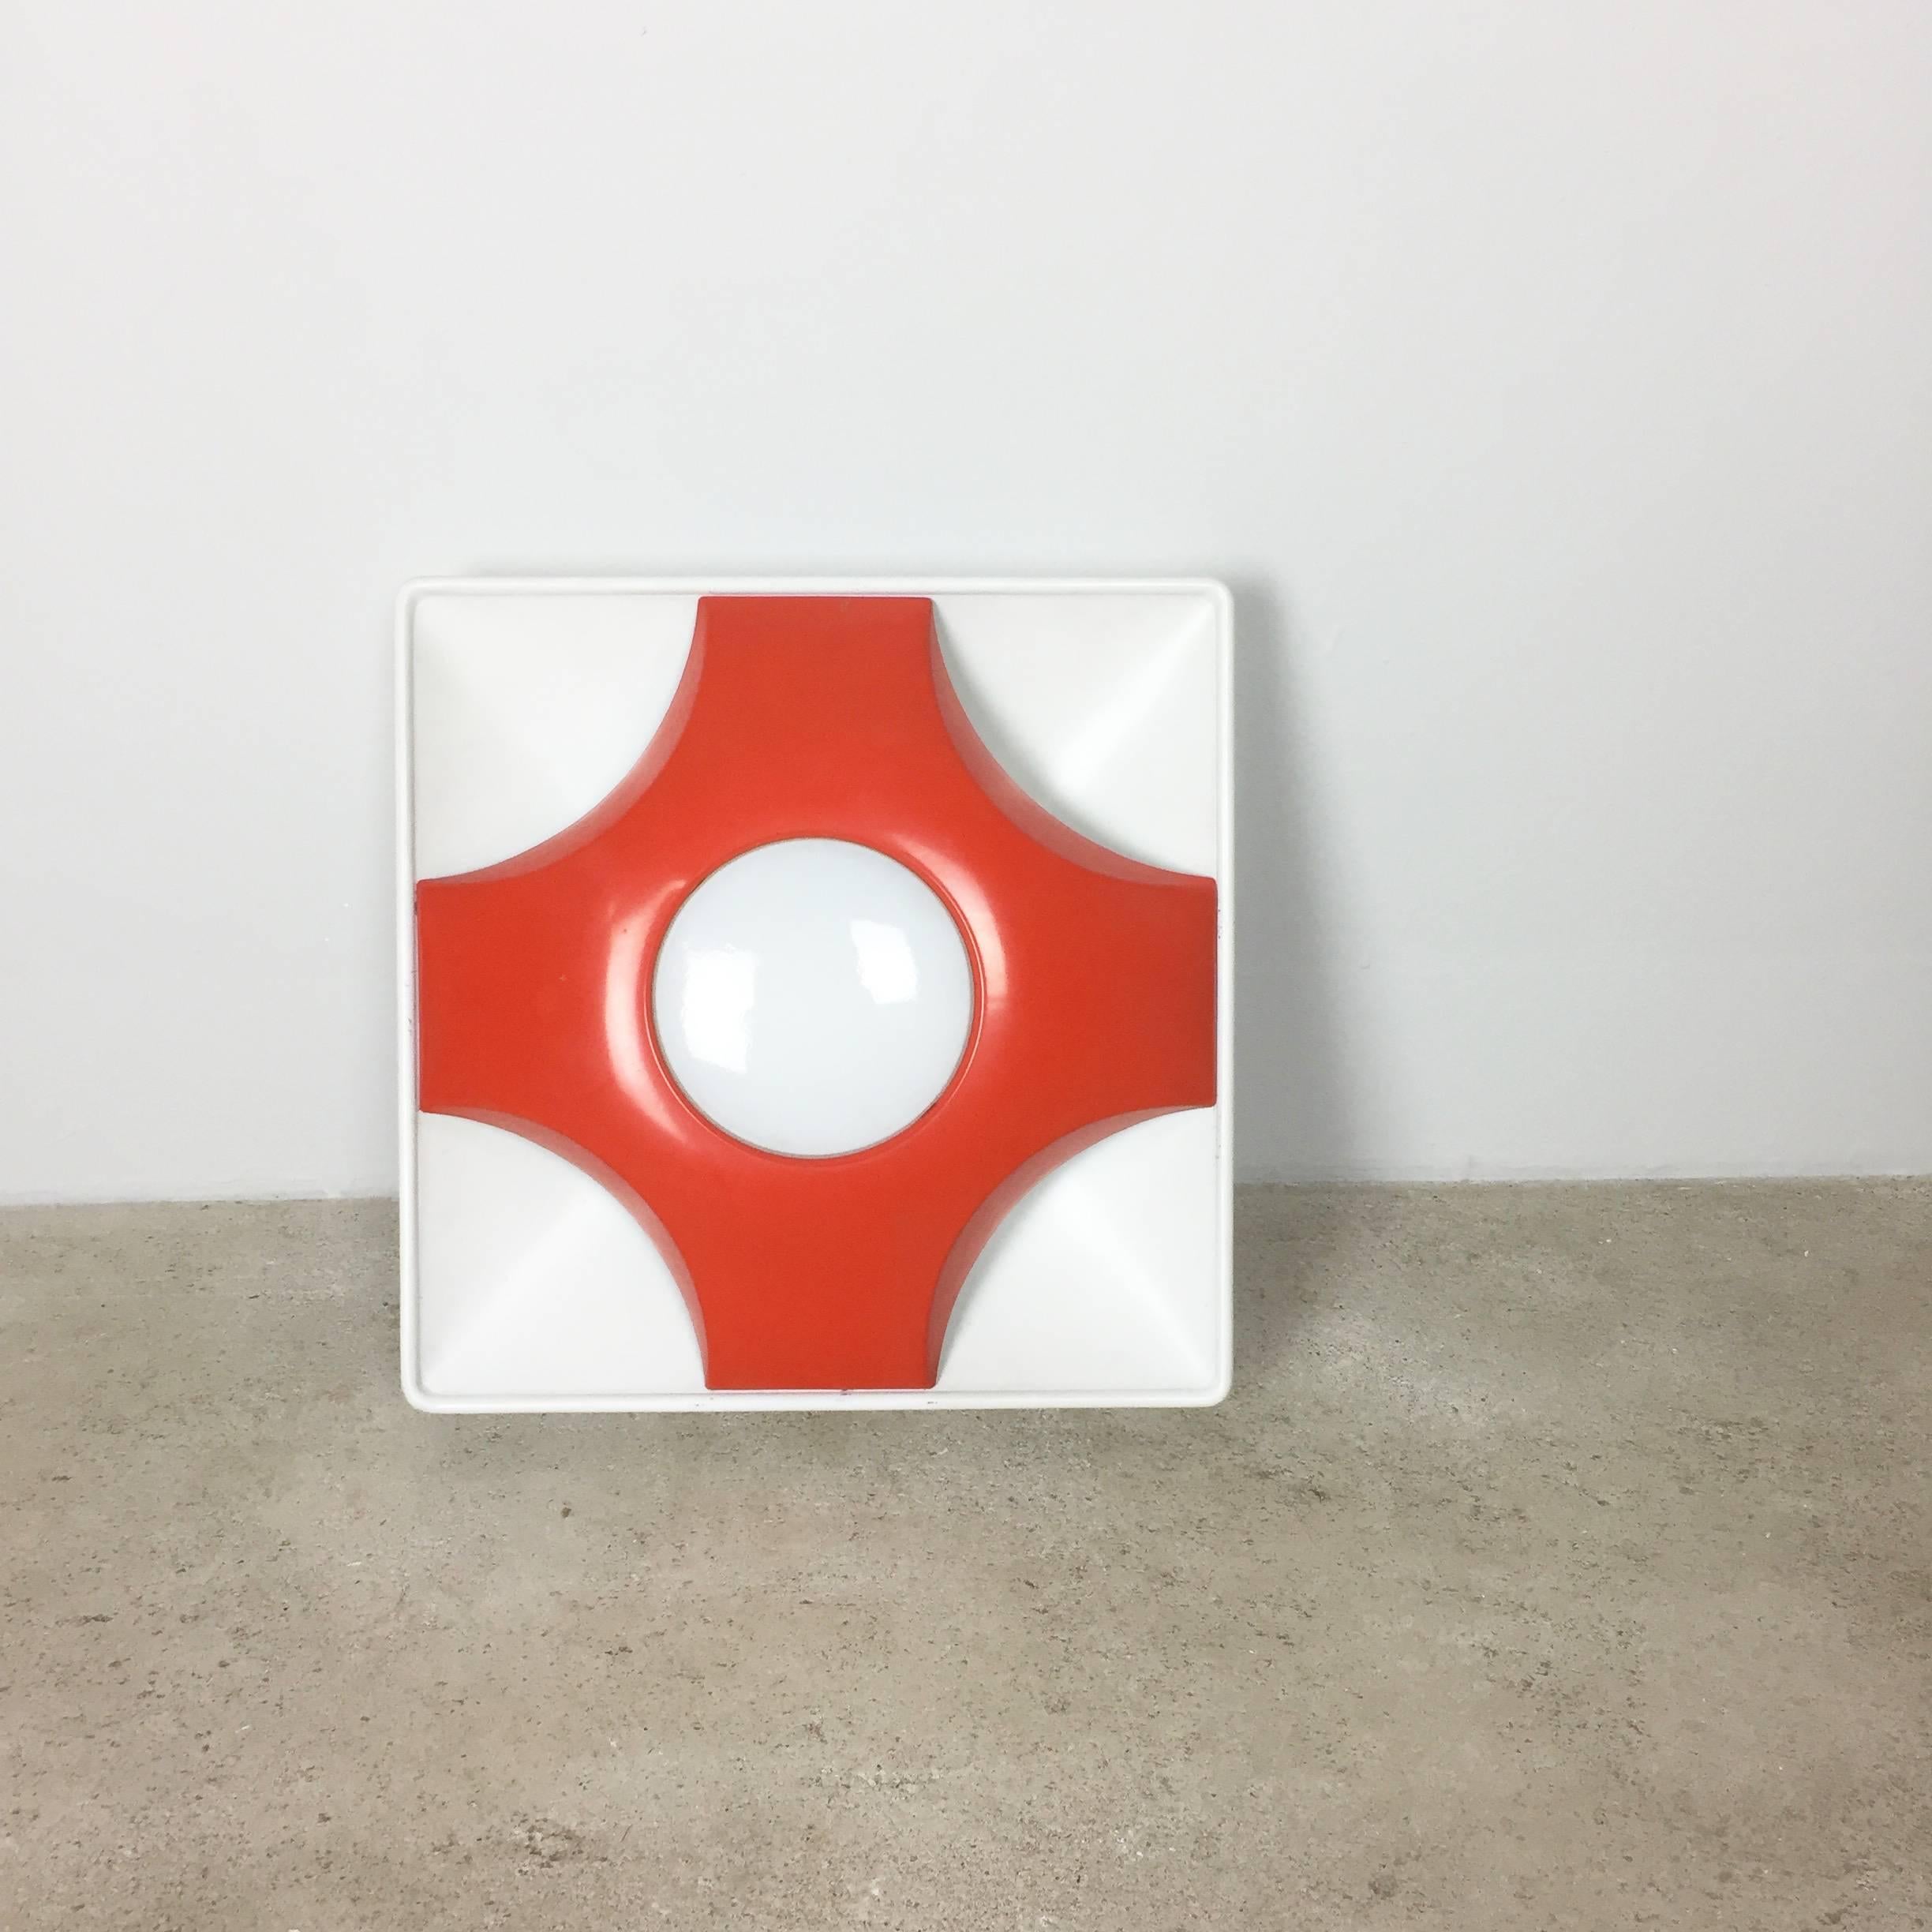 Article:

Wall light


Producer:

Sölken Lights, Germany


Origin:

Germany



Age:

1970s



An original white and red wall light designed and produced by Sölken Leuchten in Germany in the 1970s. This piece is made of solid